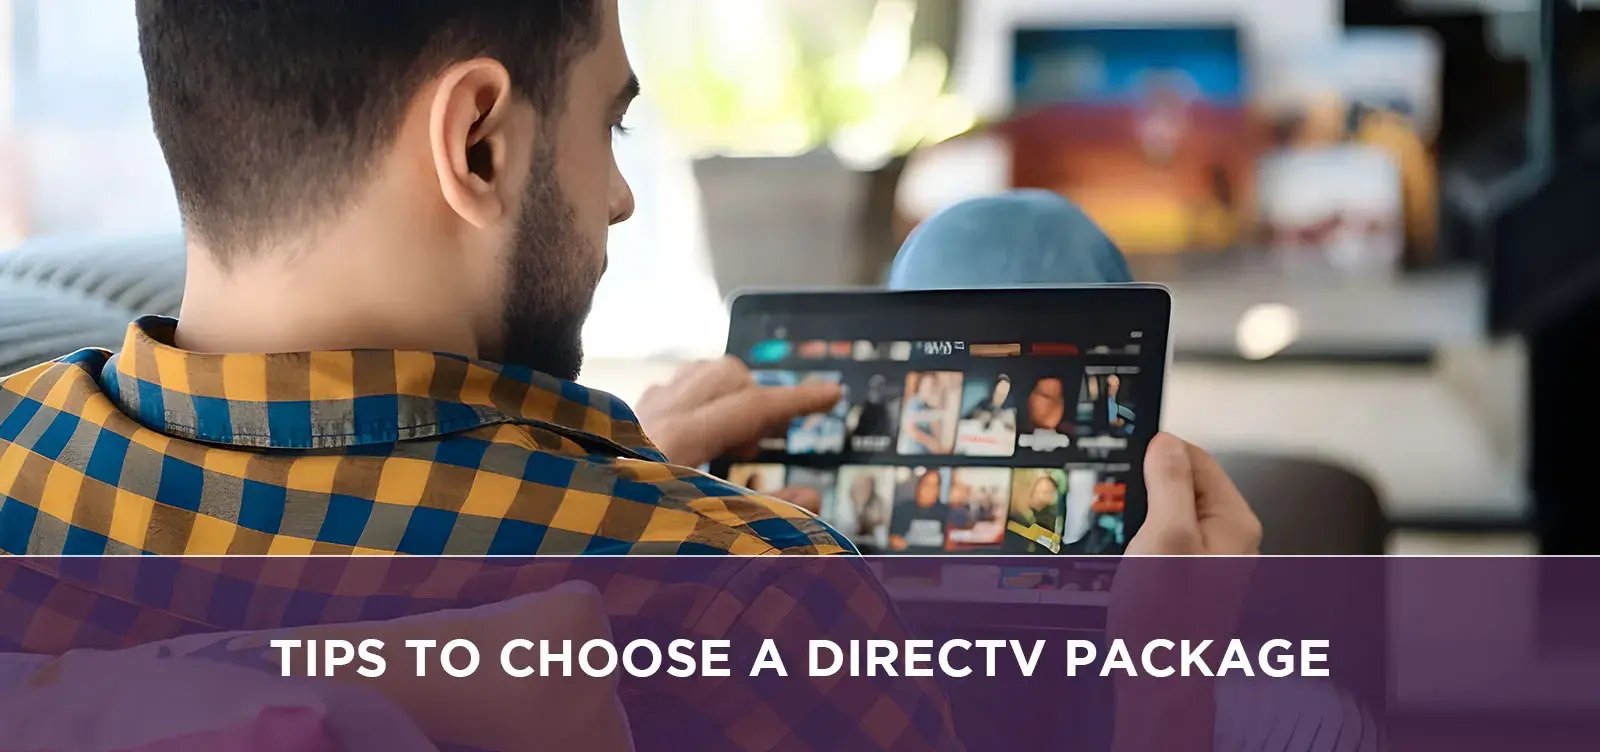 Tips to Choose a DIRECTV Package